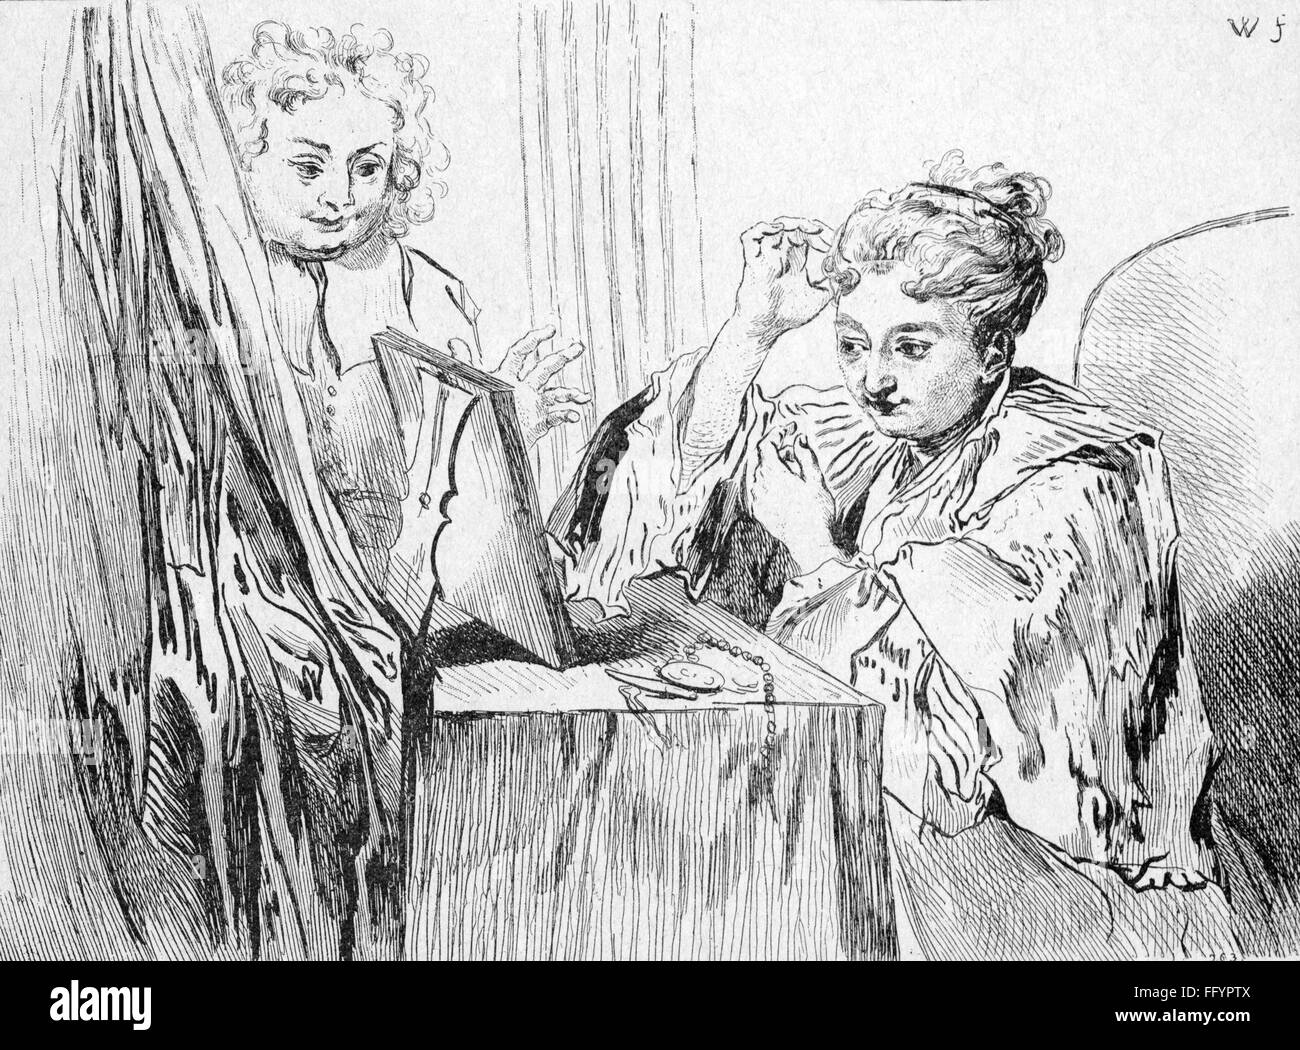 cosmetics, woman at make-up table, adjusting her hair, drawing by Antoine Watteau (1684 - 1721), 18th century, 18th century, graphic, graphics, half length, sitting, sit, make-up table, dressing table, make-up tables, dressing tables, mirror, mirrors, hair, hair style, hairstyle, hairdo, haircut, hair styles, hairstyles, haircuts, curls, hair care, beauty care, cape, capes, studies, study, cosmetics, cosmetic, historic, historical, woman, women, female, Additional-Rights-Clearences-Not Available Stock Photo